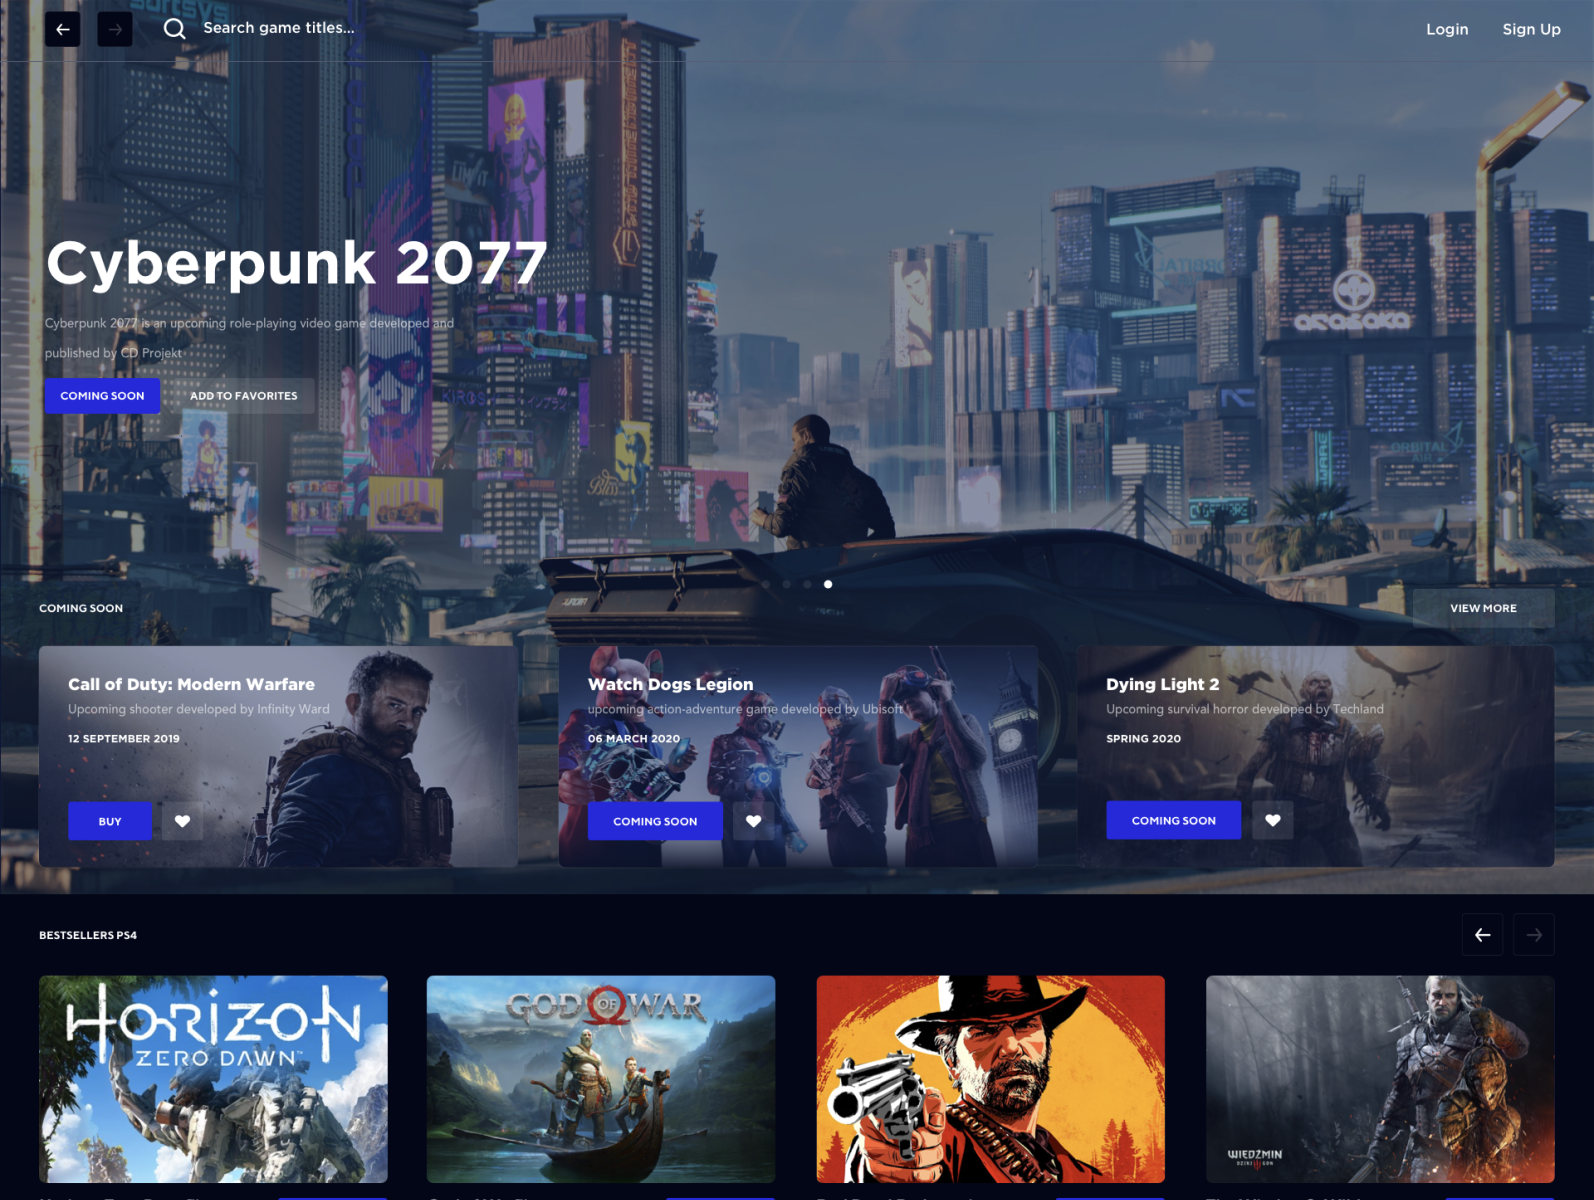 gaming-website-landing-page-concept-by-ayush-bhamu-on-dribbble